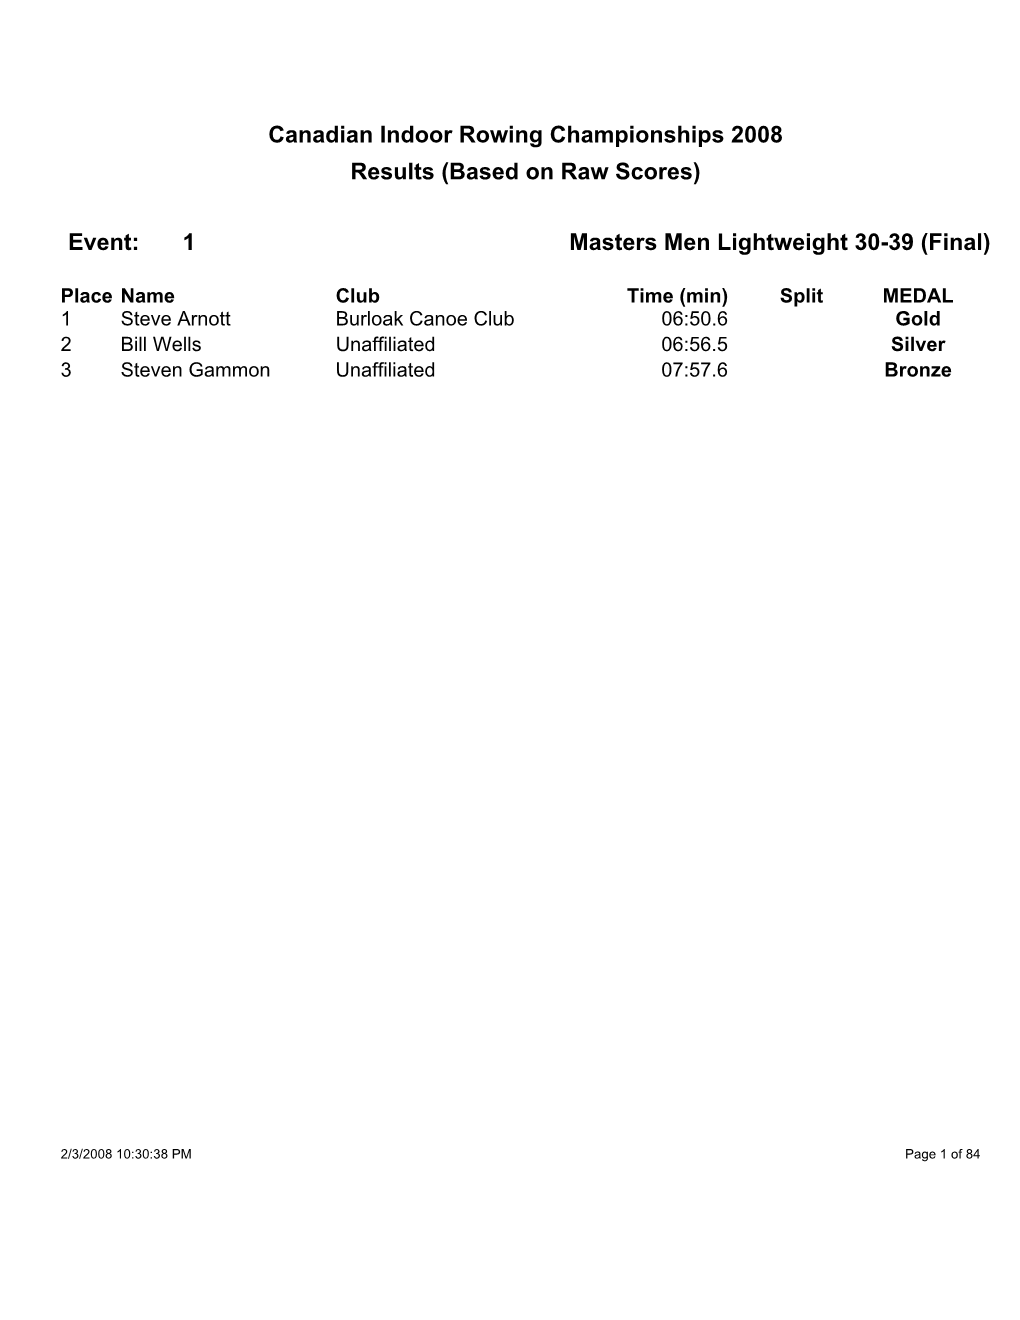 Canadian Indoor Rowing Championships 2008 Results (Based on Raw Scores)